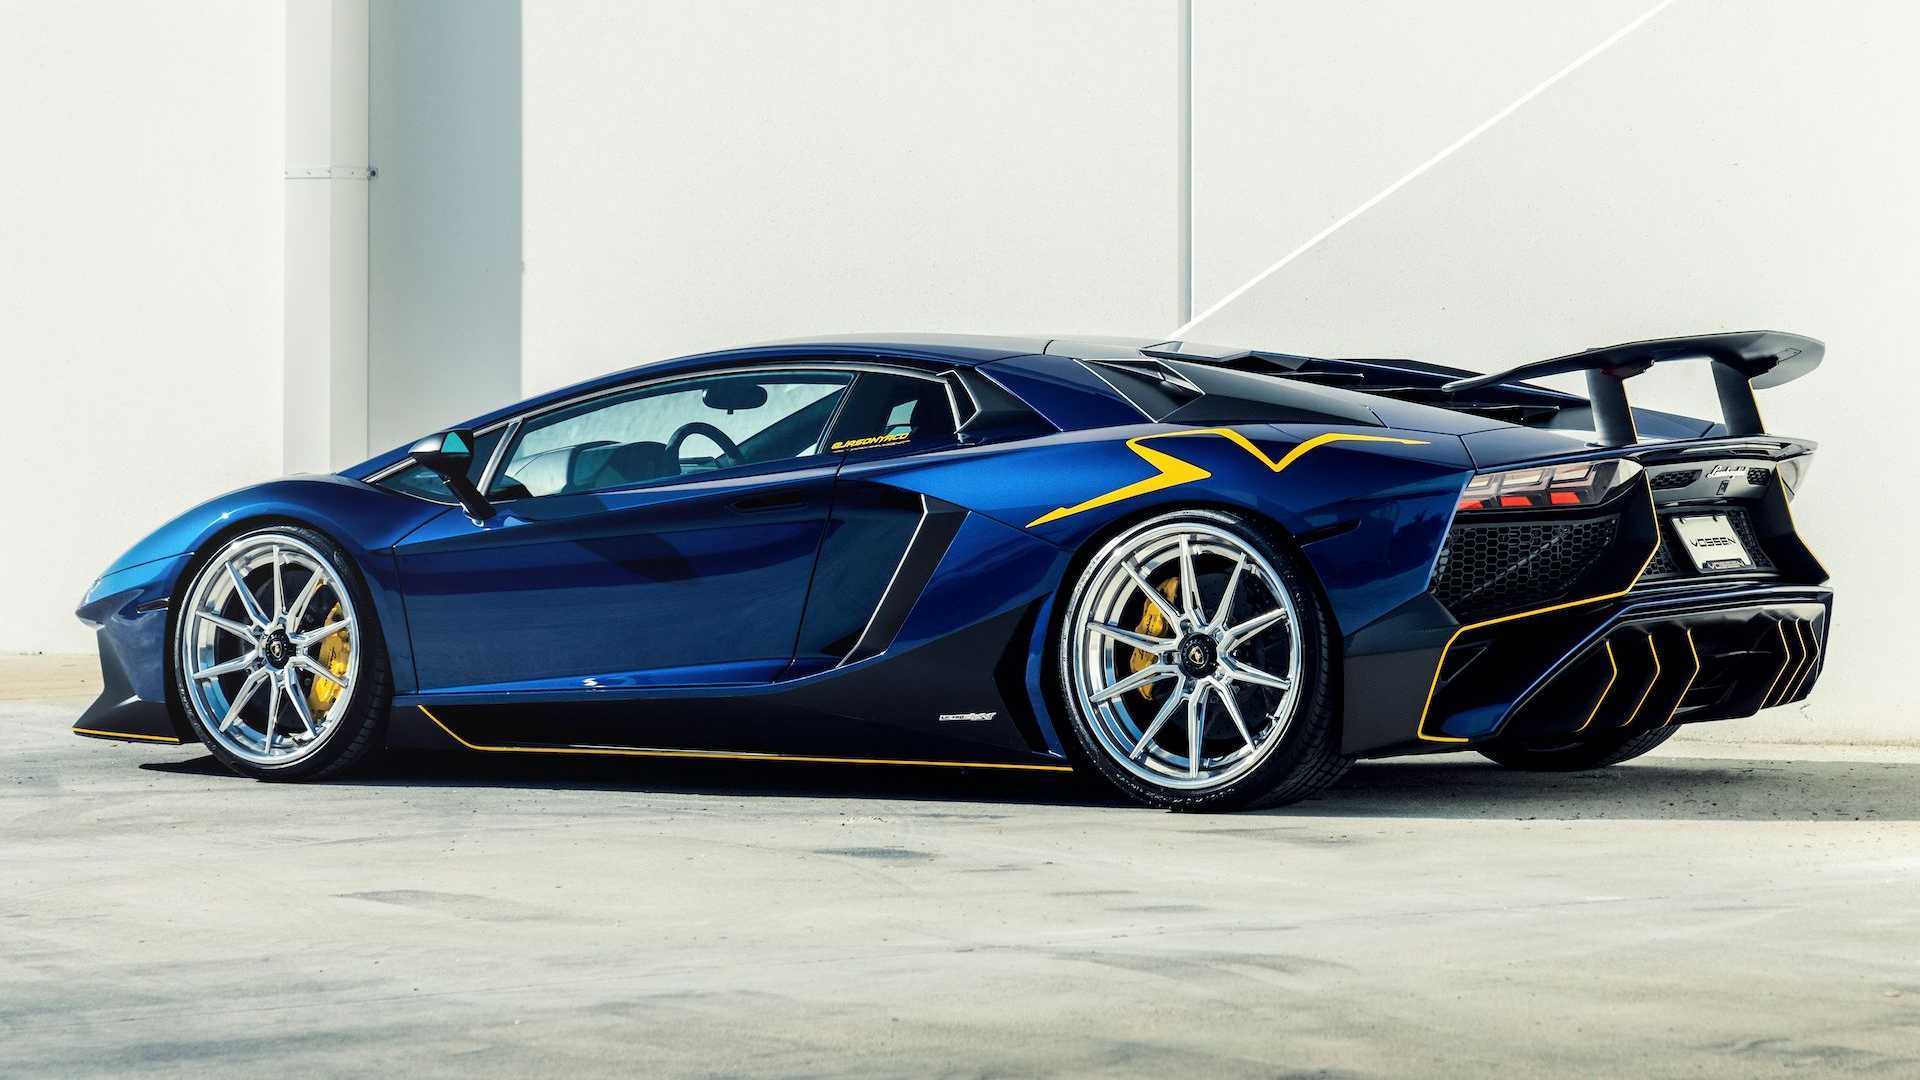 Does This Blue Lamborghini Aventador SV Look Better With 22 Inch Aftermarket Wheels?